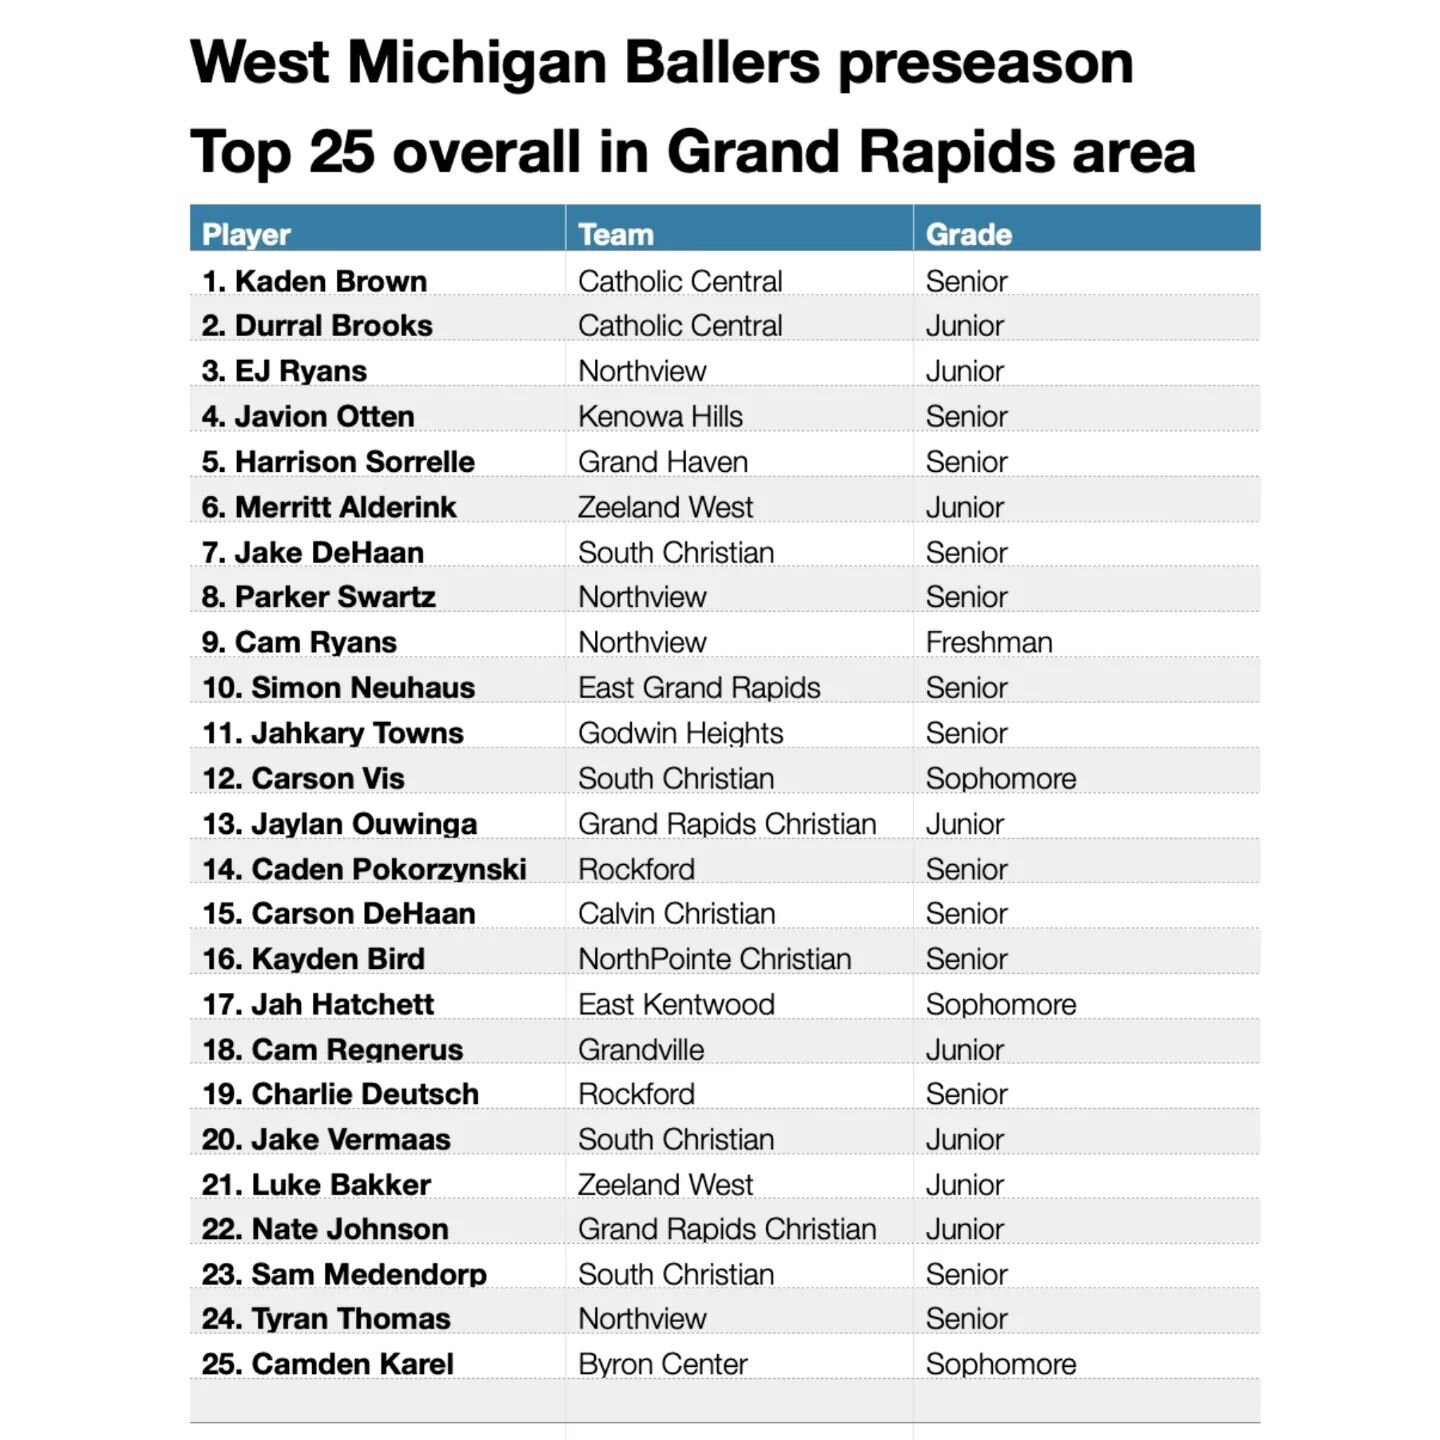 Preseason Top 25 overall players in the greater Grand Rapids area.